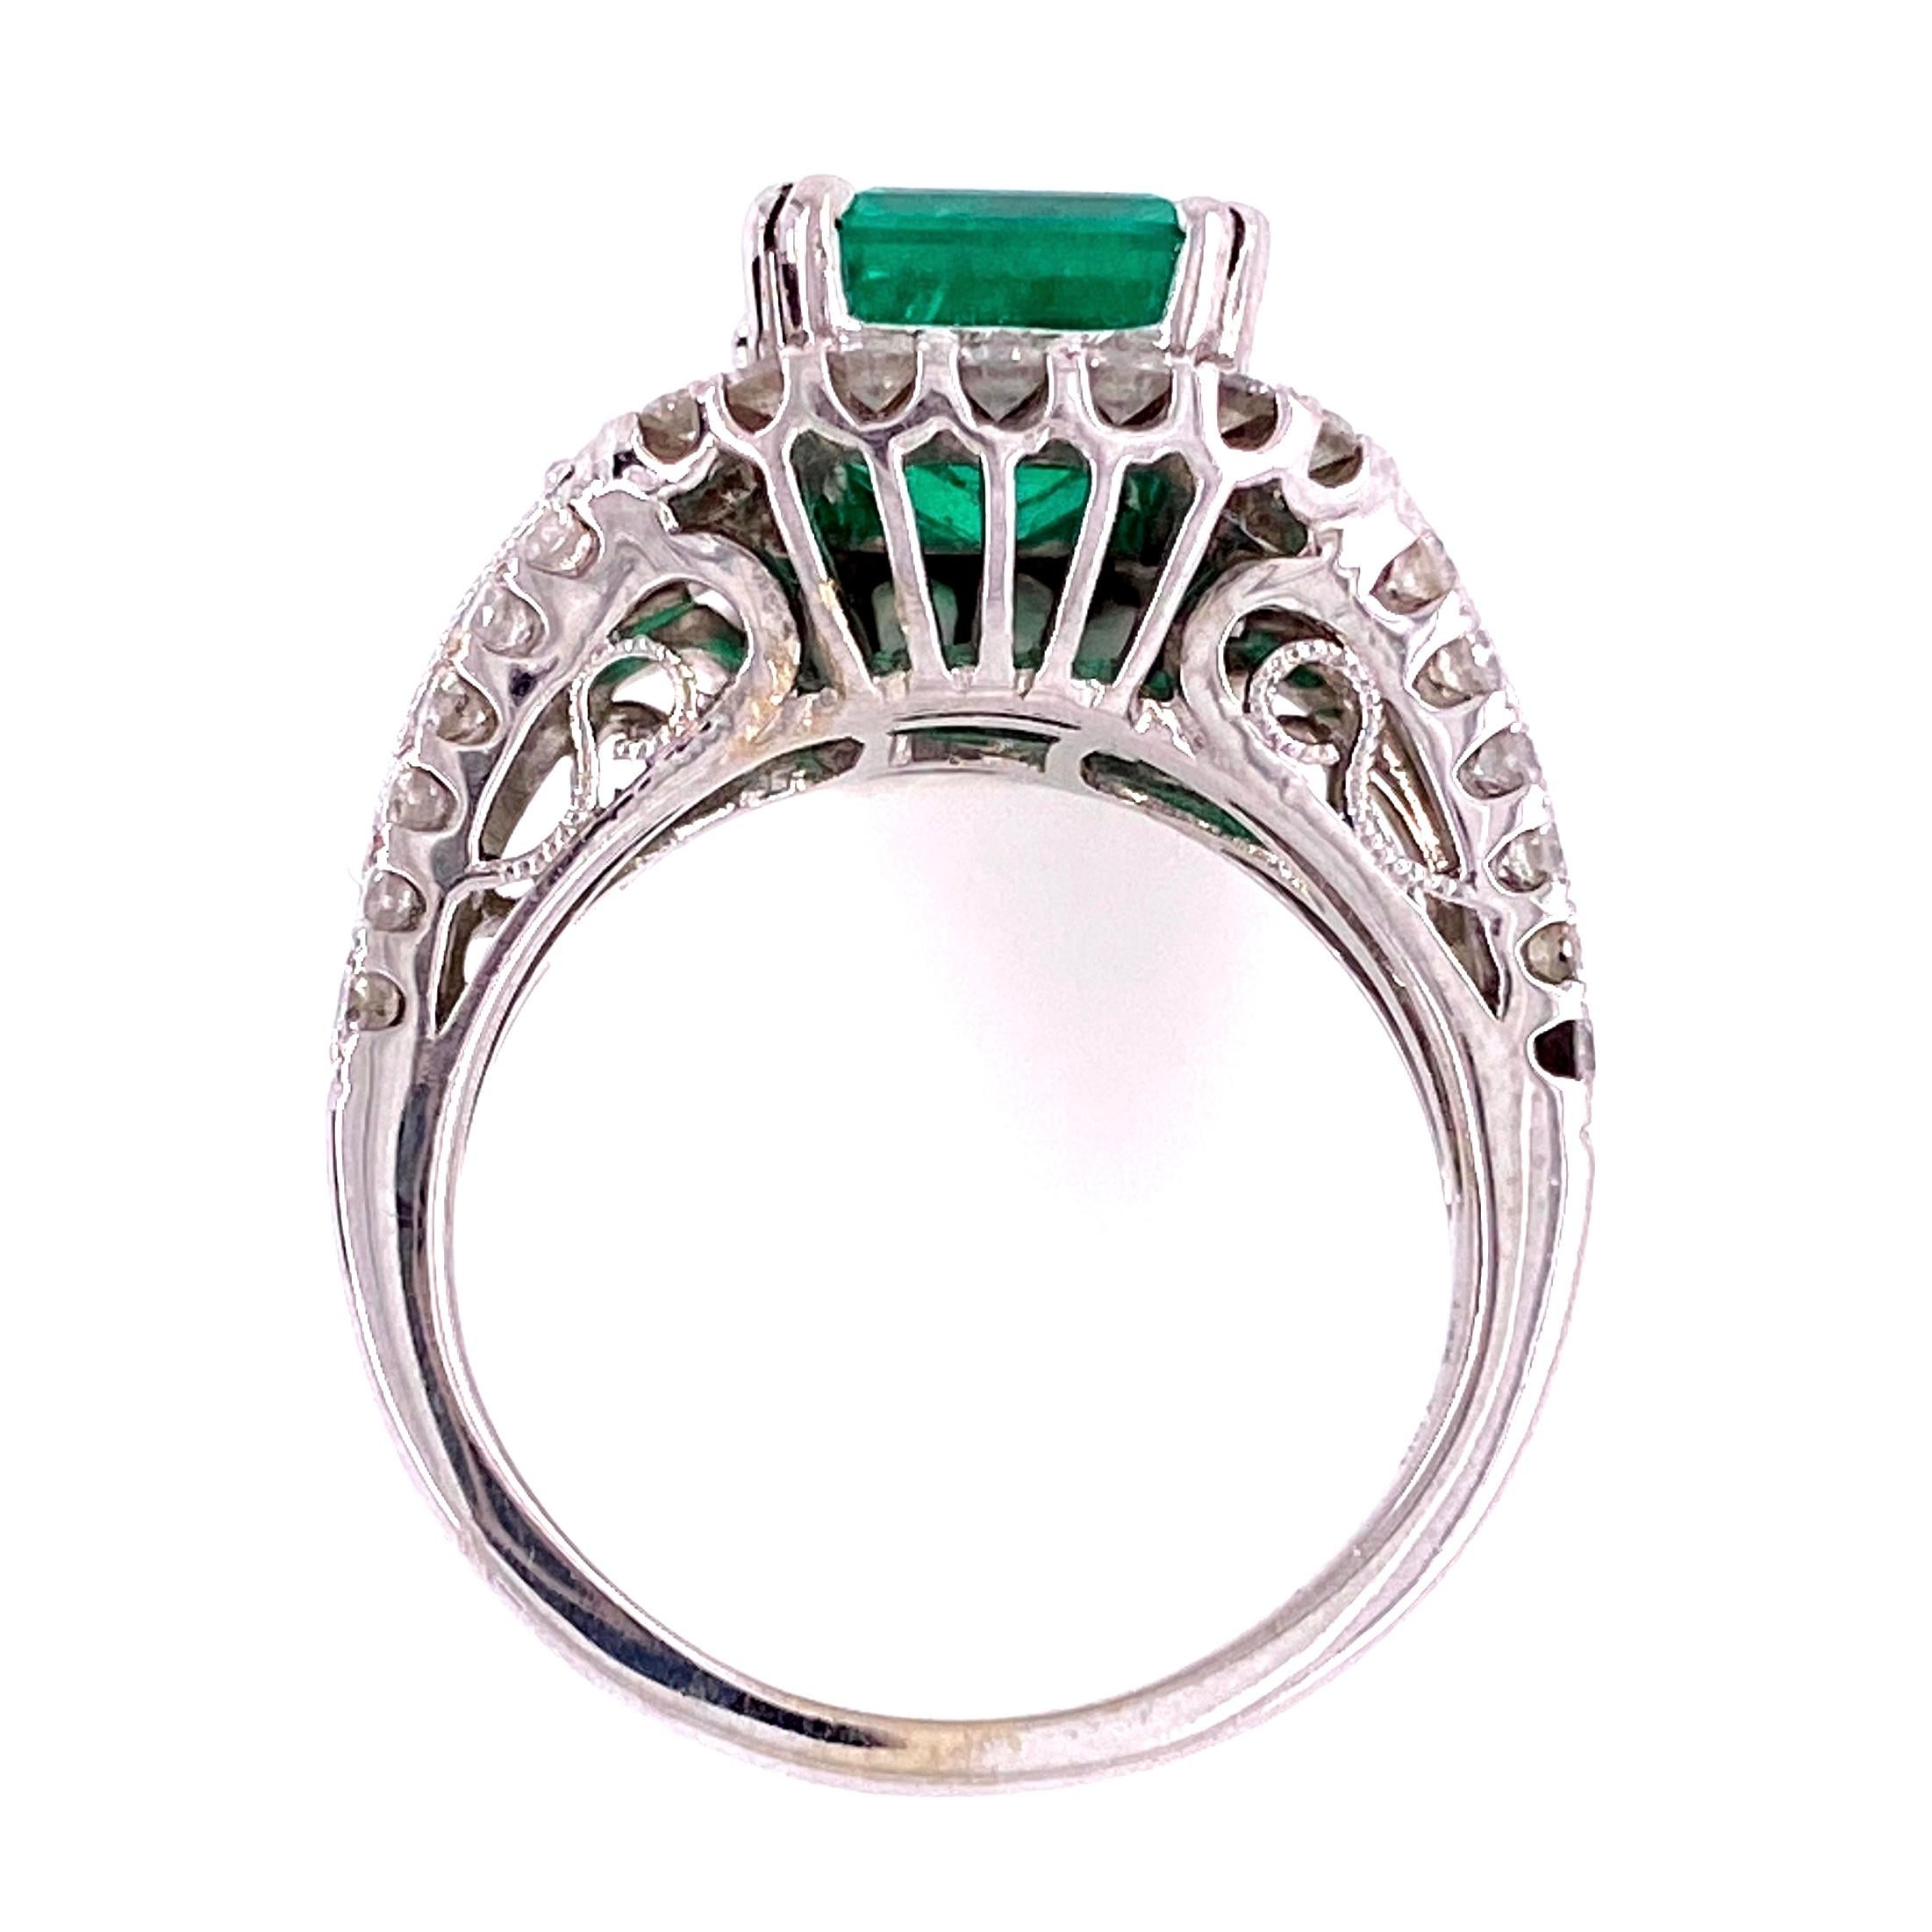 Women's Mid-Century Modern Emerald Cut Emerald and Diamond Gold Cocktail Ring For Sale